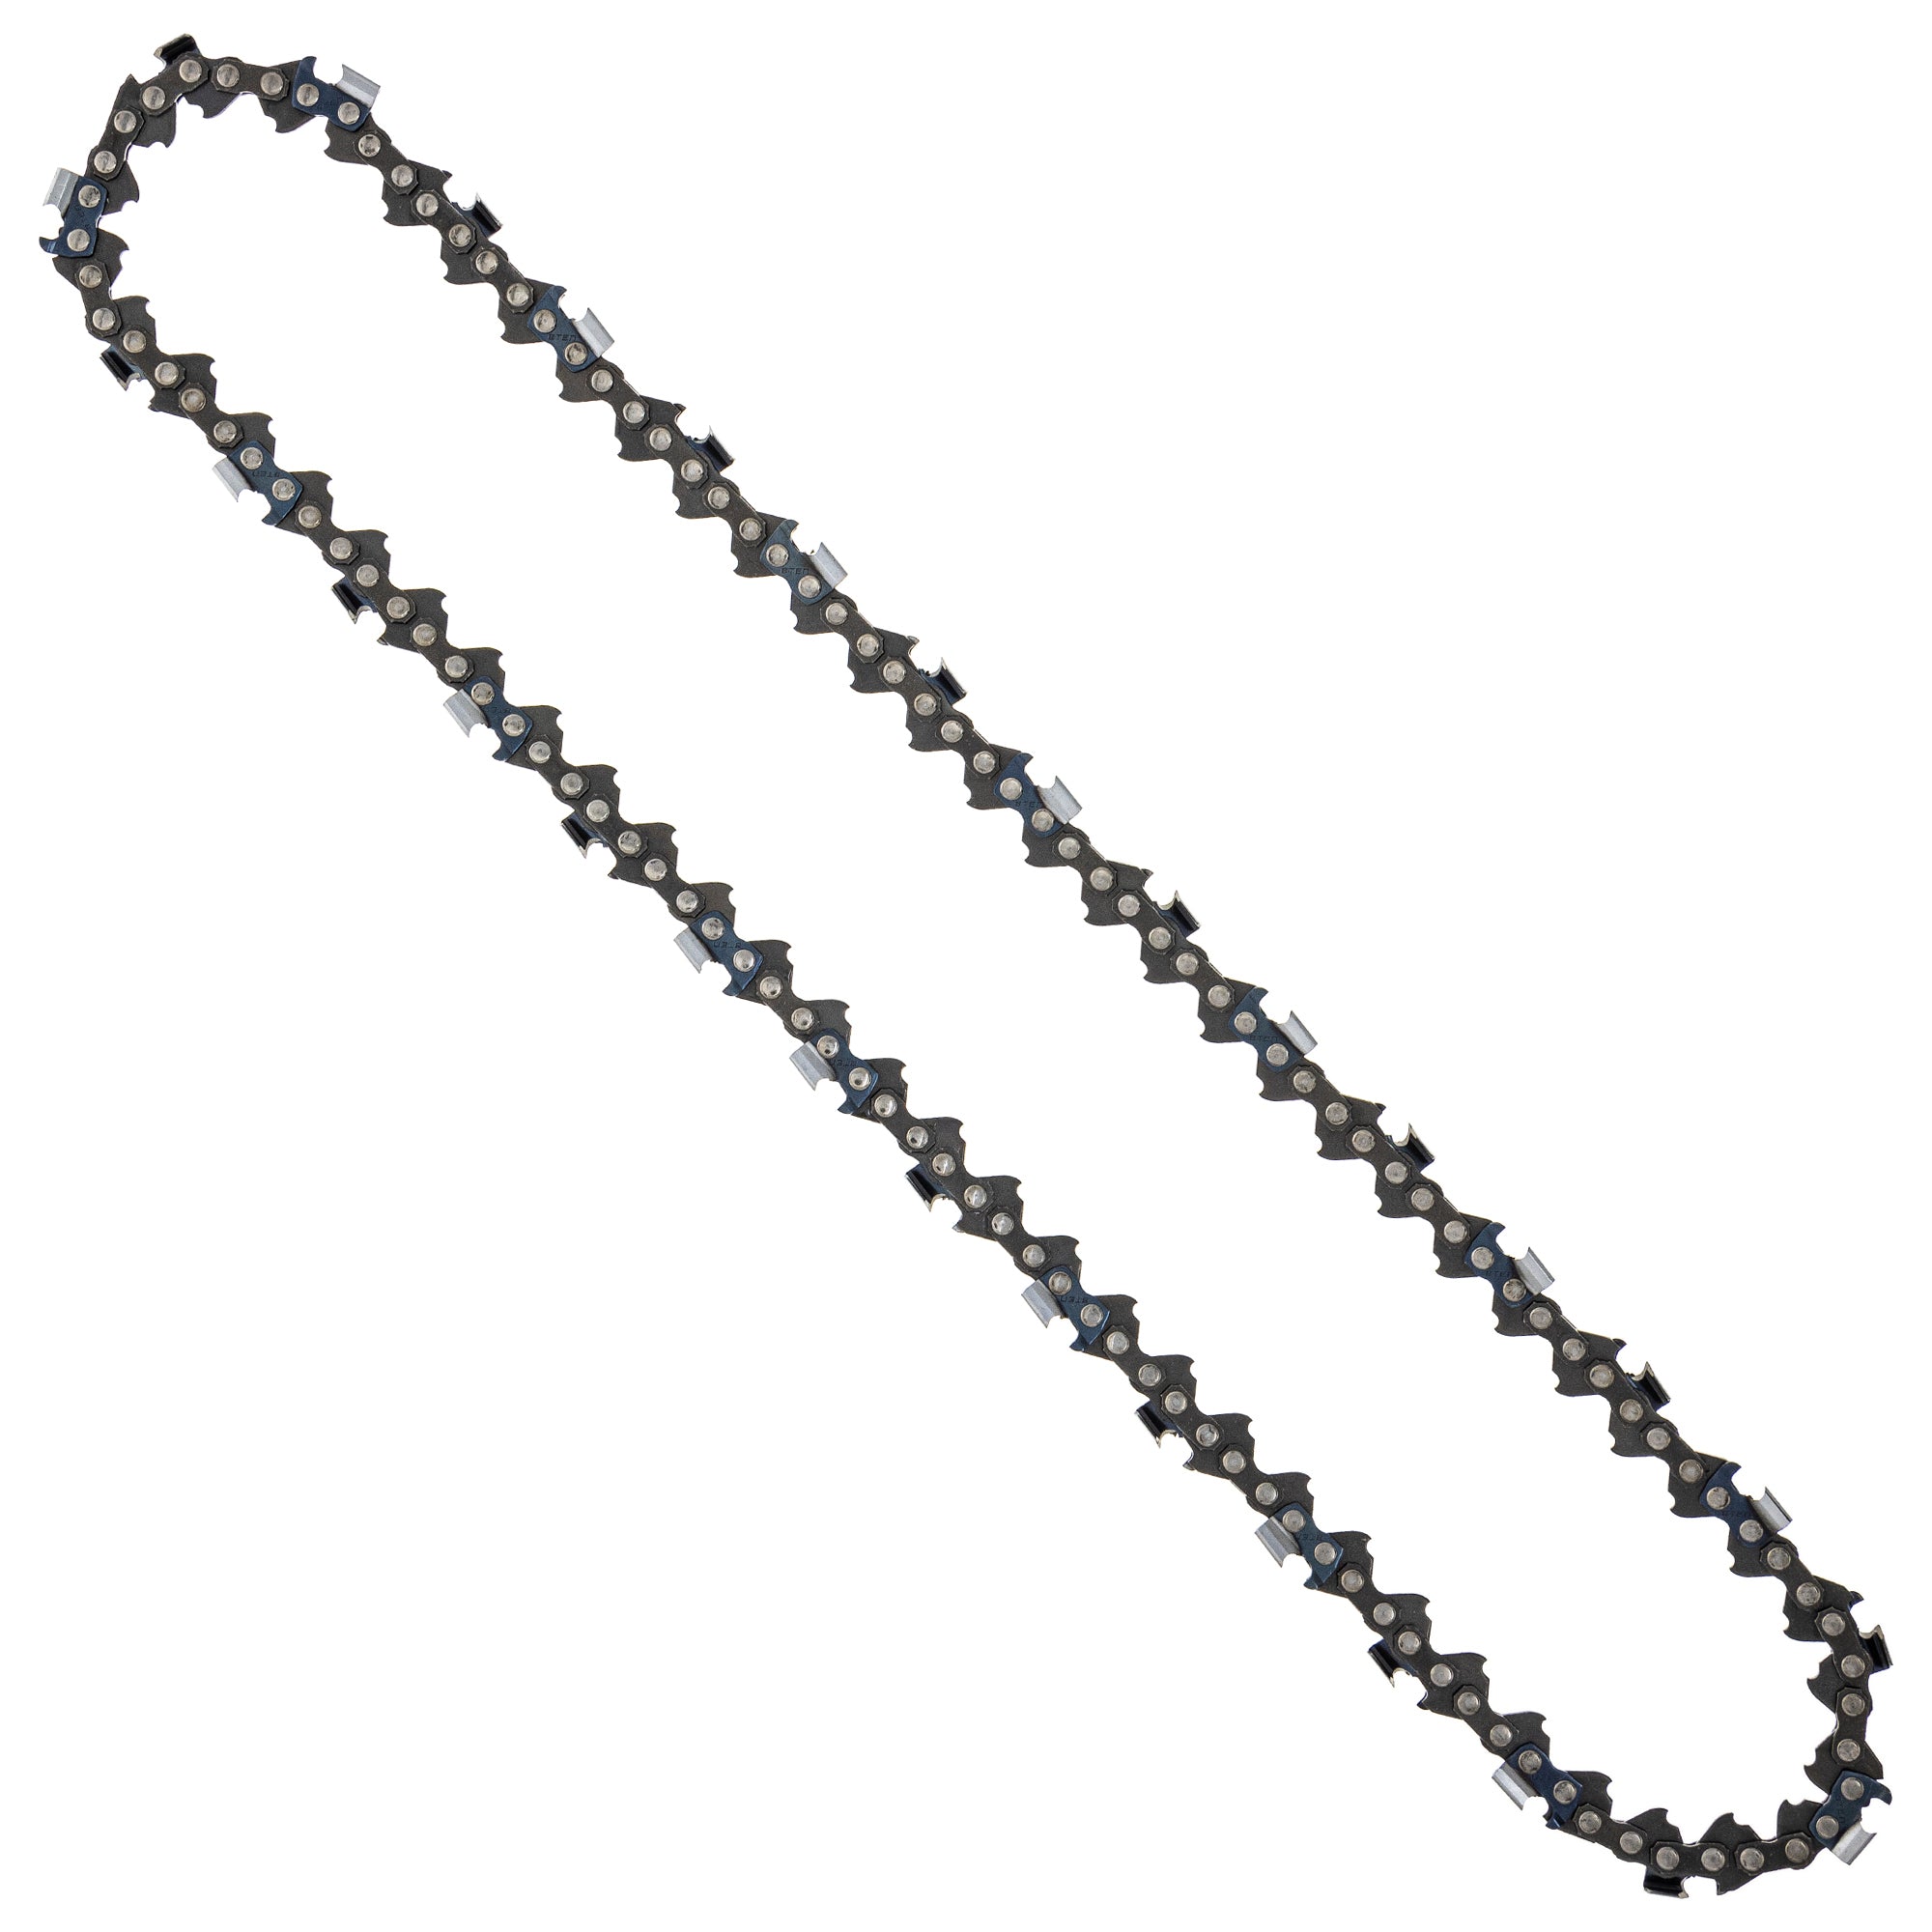 8TEN 810-CCC2399H Chain 2-Pack for zOTHER Oregon MS 25 070 025